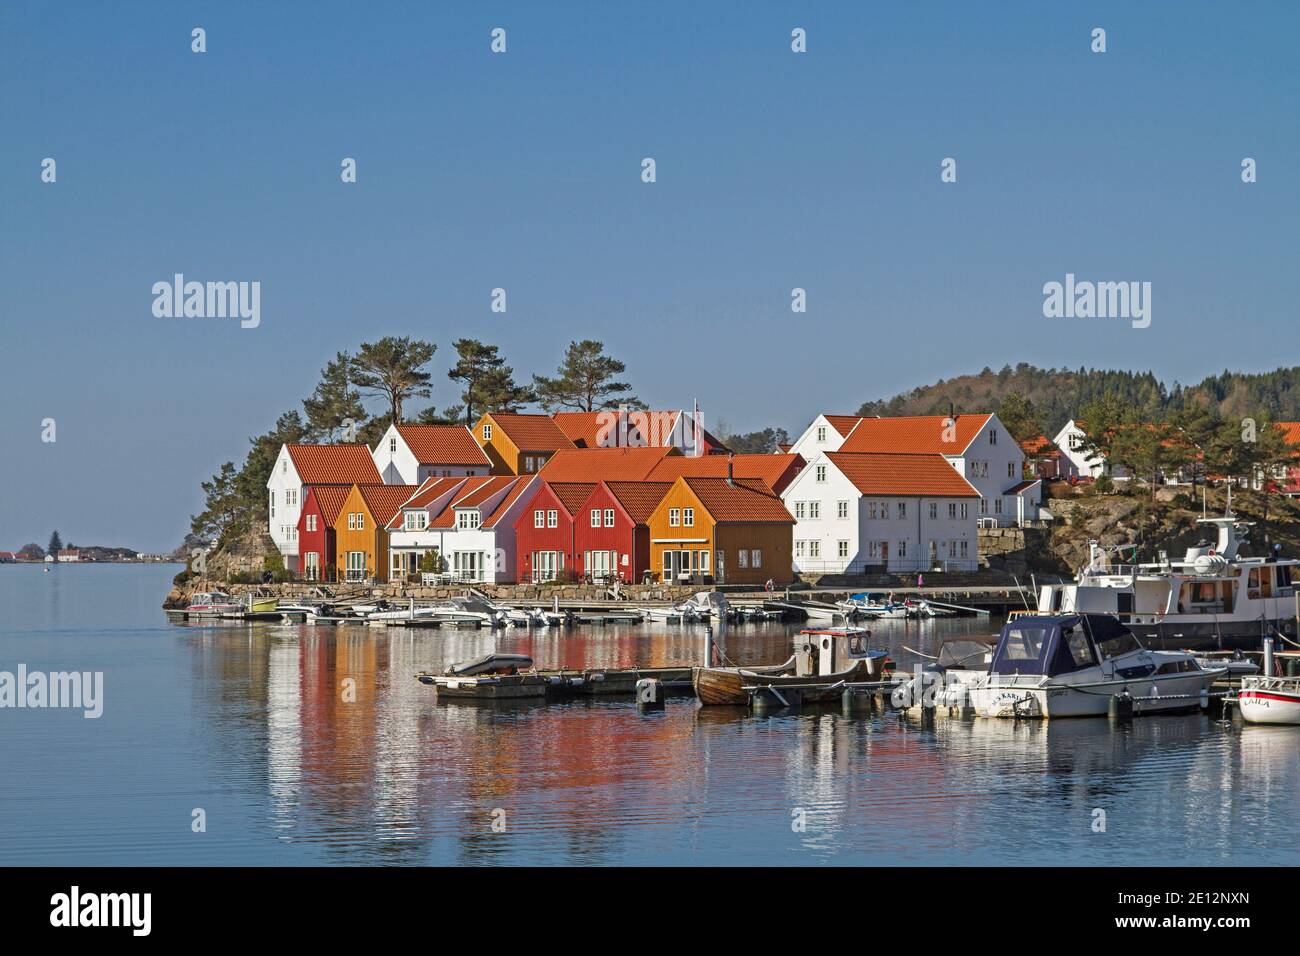 Höllen Is A Fishing Village In Vest-Agder County In Norway And Lies At The Mouth Of The Sogneelva River In The North Sea Stock Photo